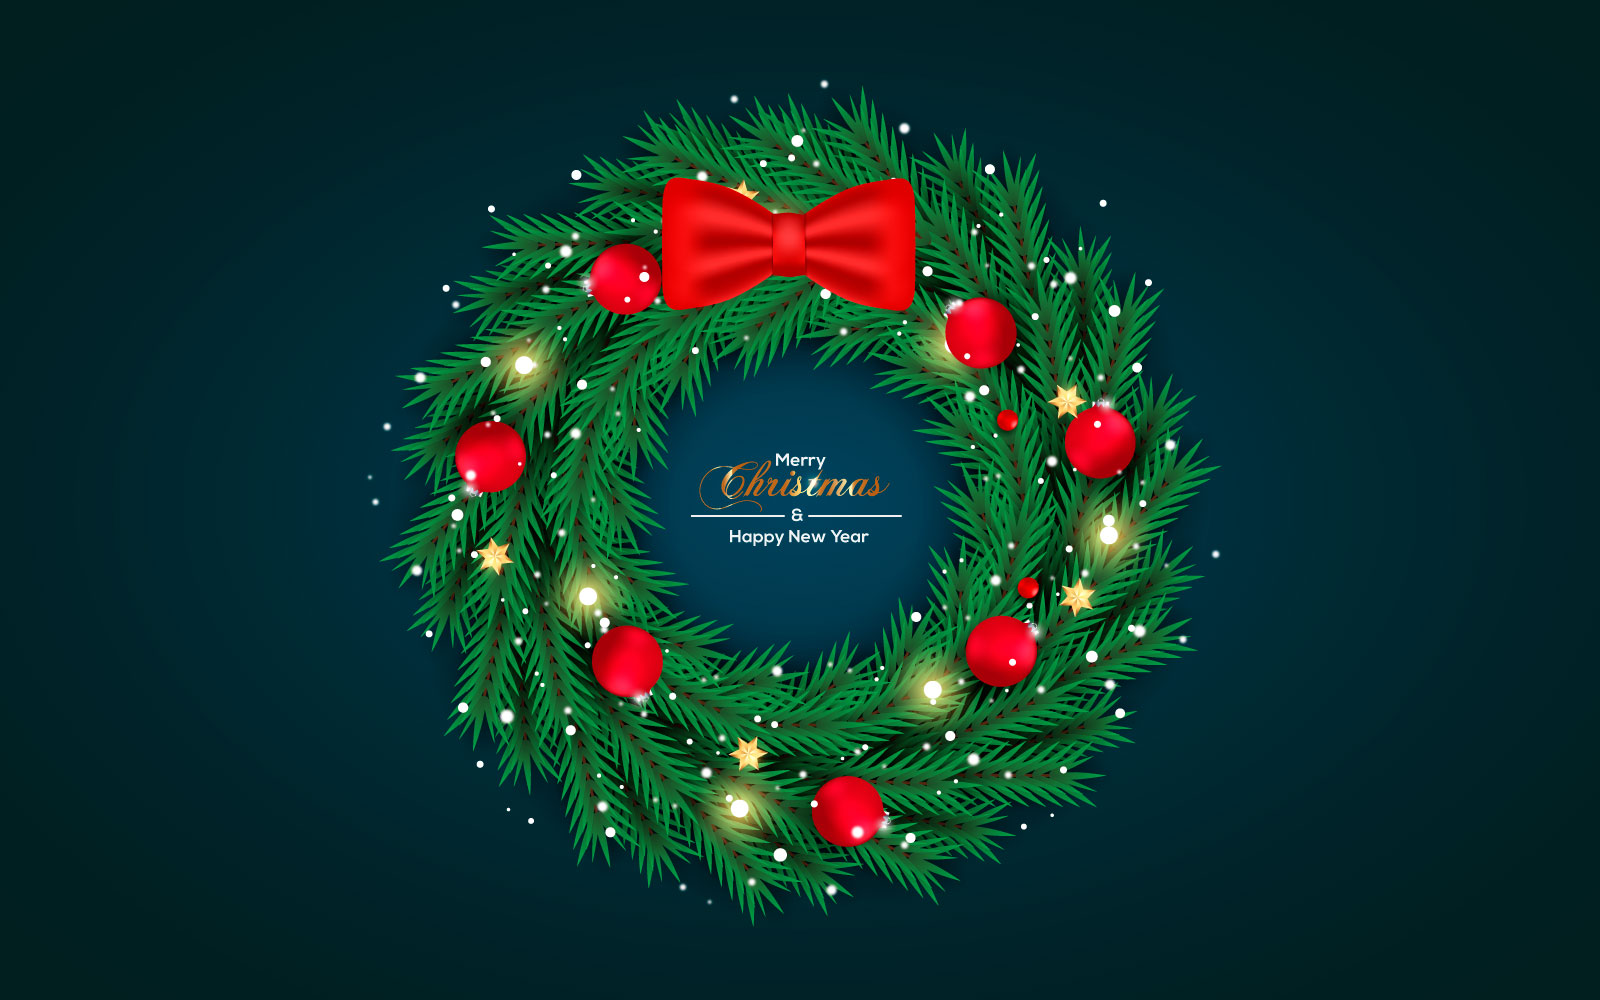 merry Christmas wreath vector design merry christmas text with garland elements